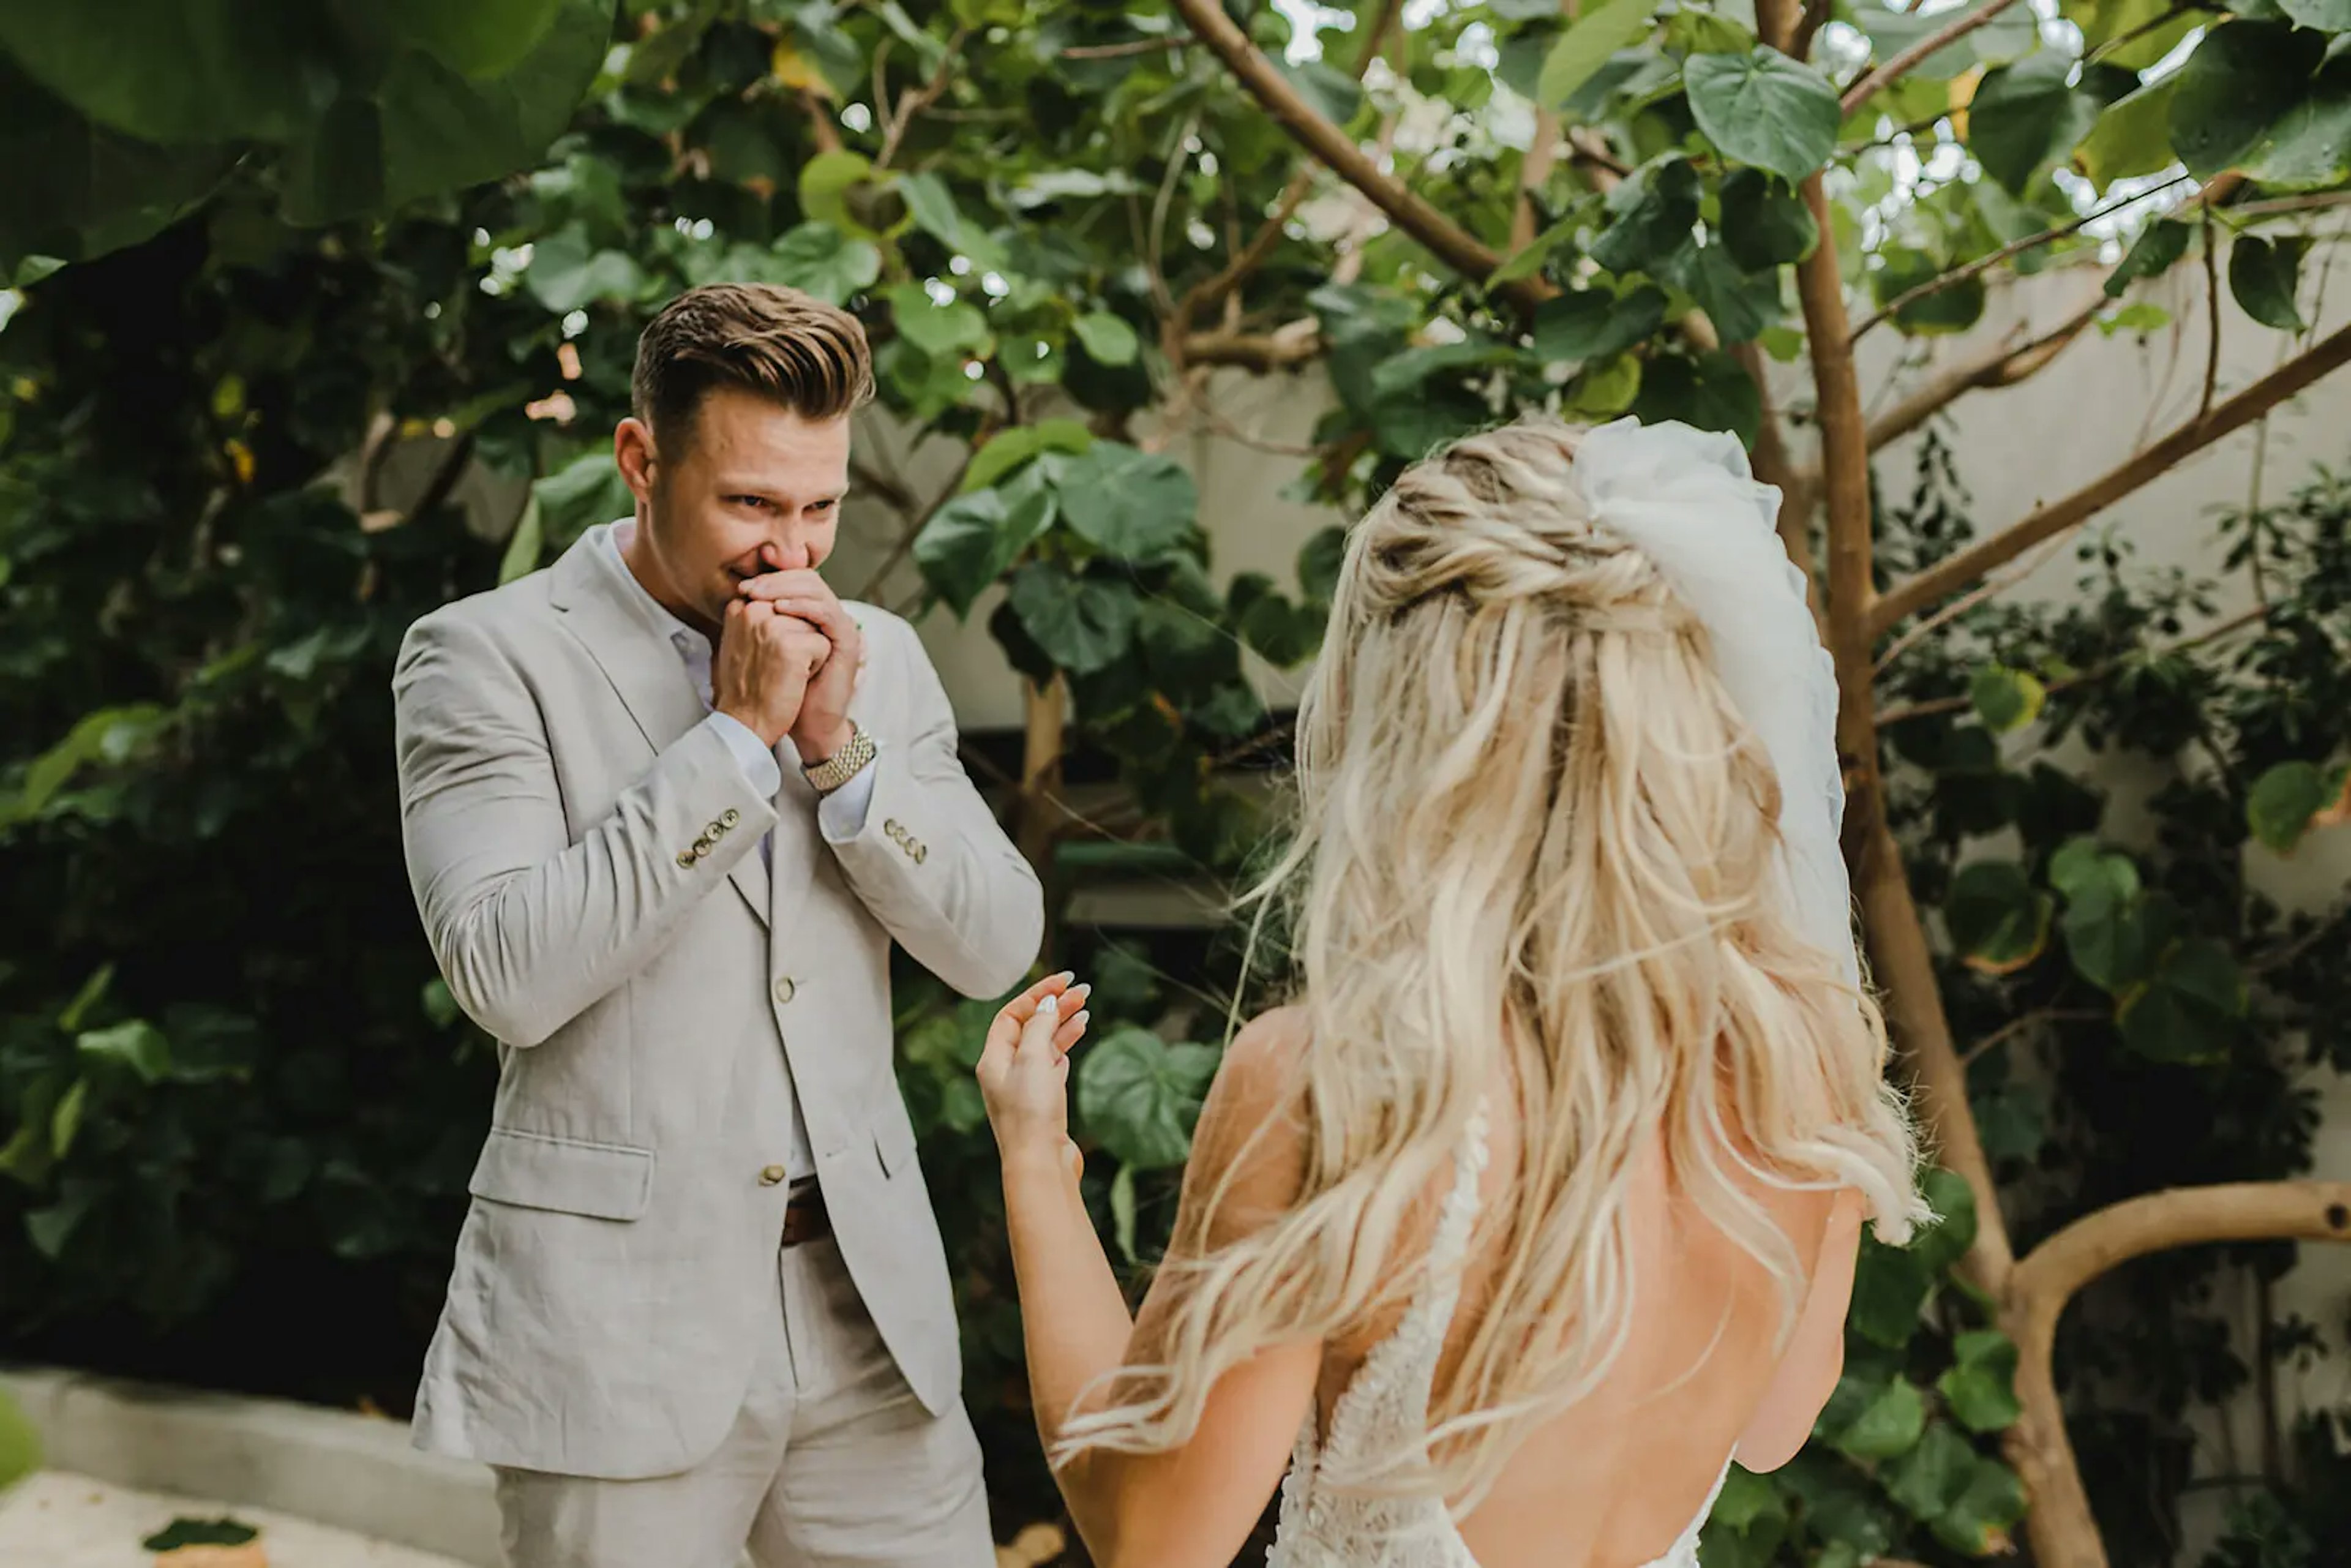 A groom, emotionally moved, holds his hands to his mouth as he gazes at his bride, who is facing away from the camera, set against a backdrop of lush greenery.